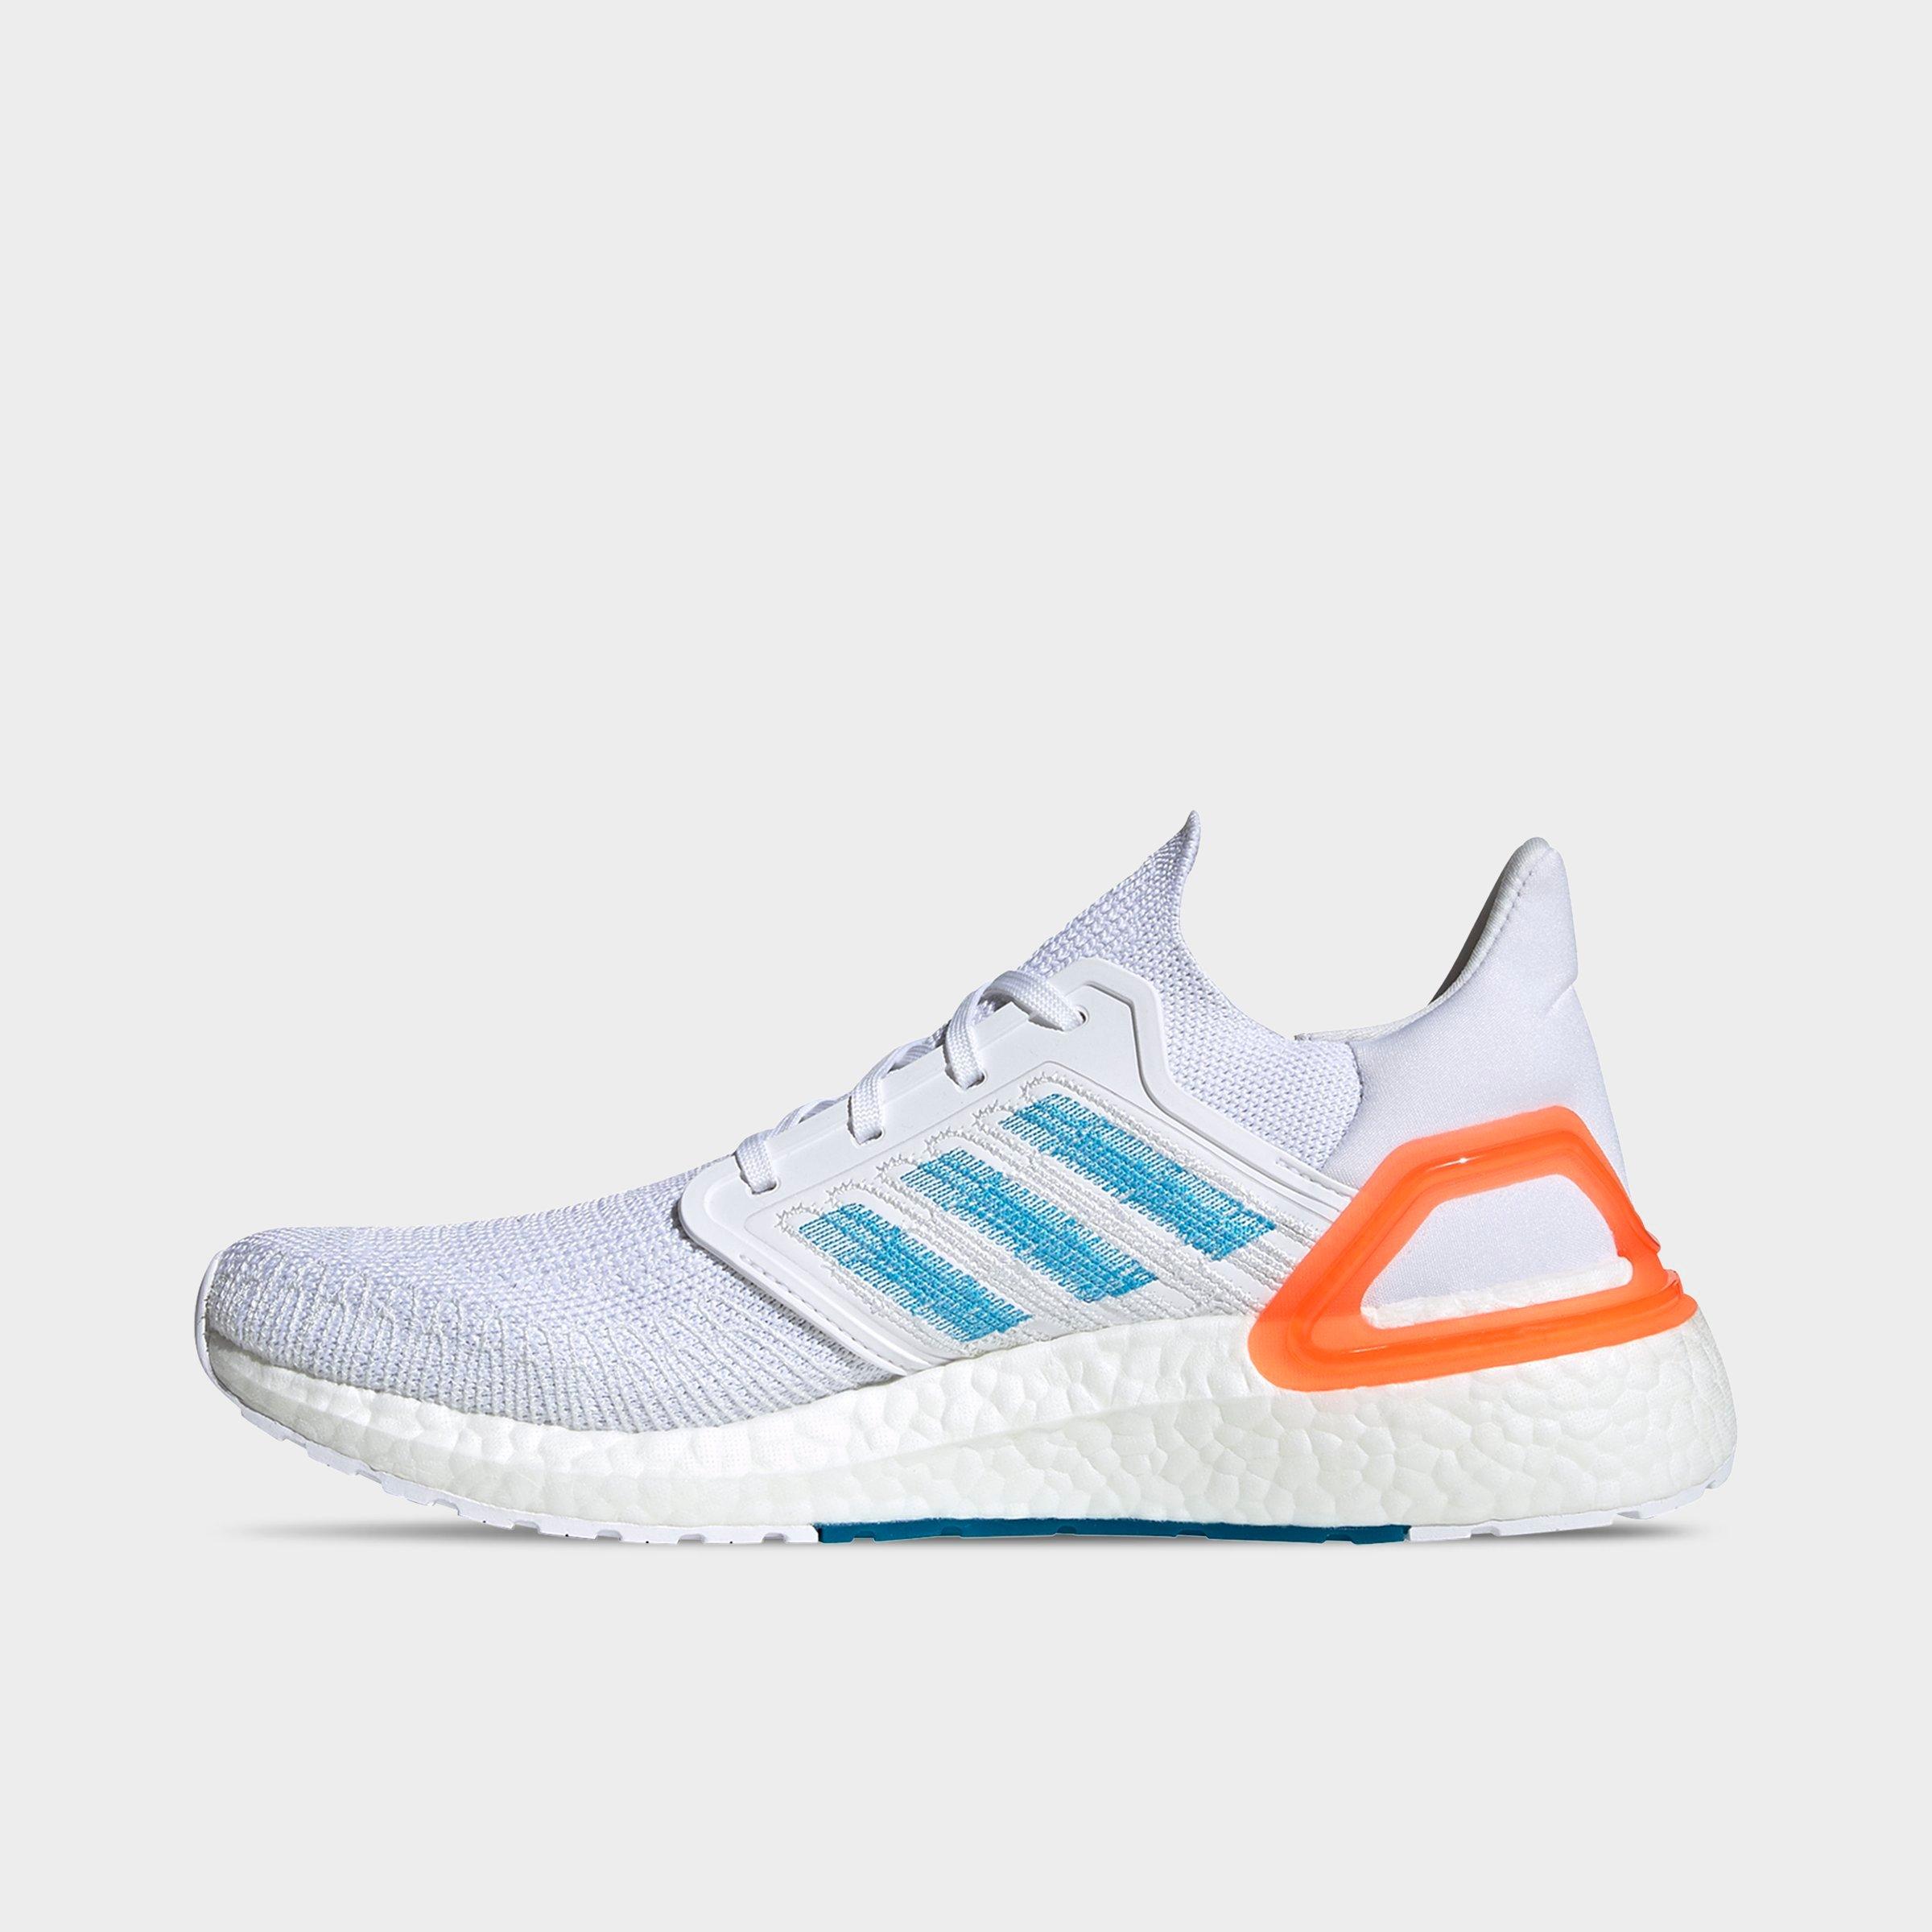 ultraboost 20 shoes white